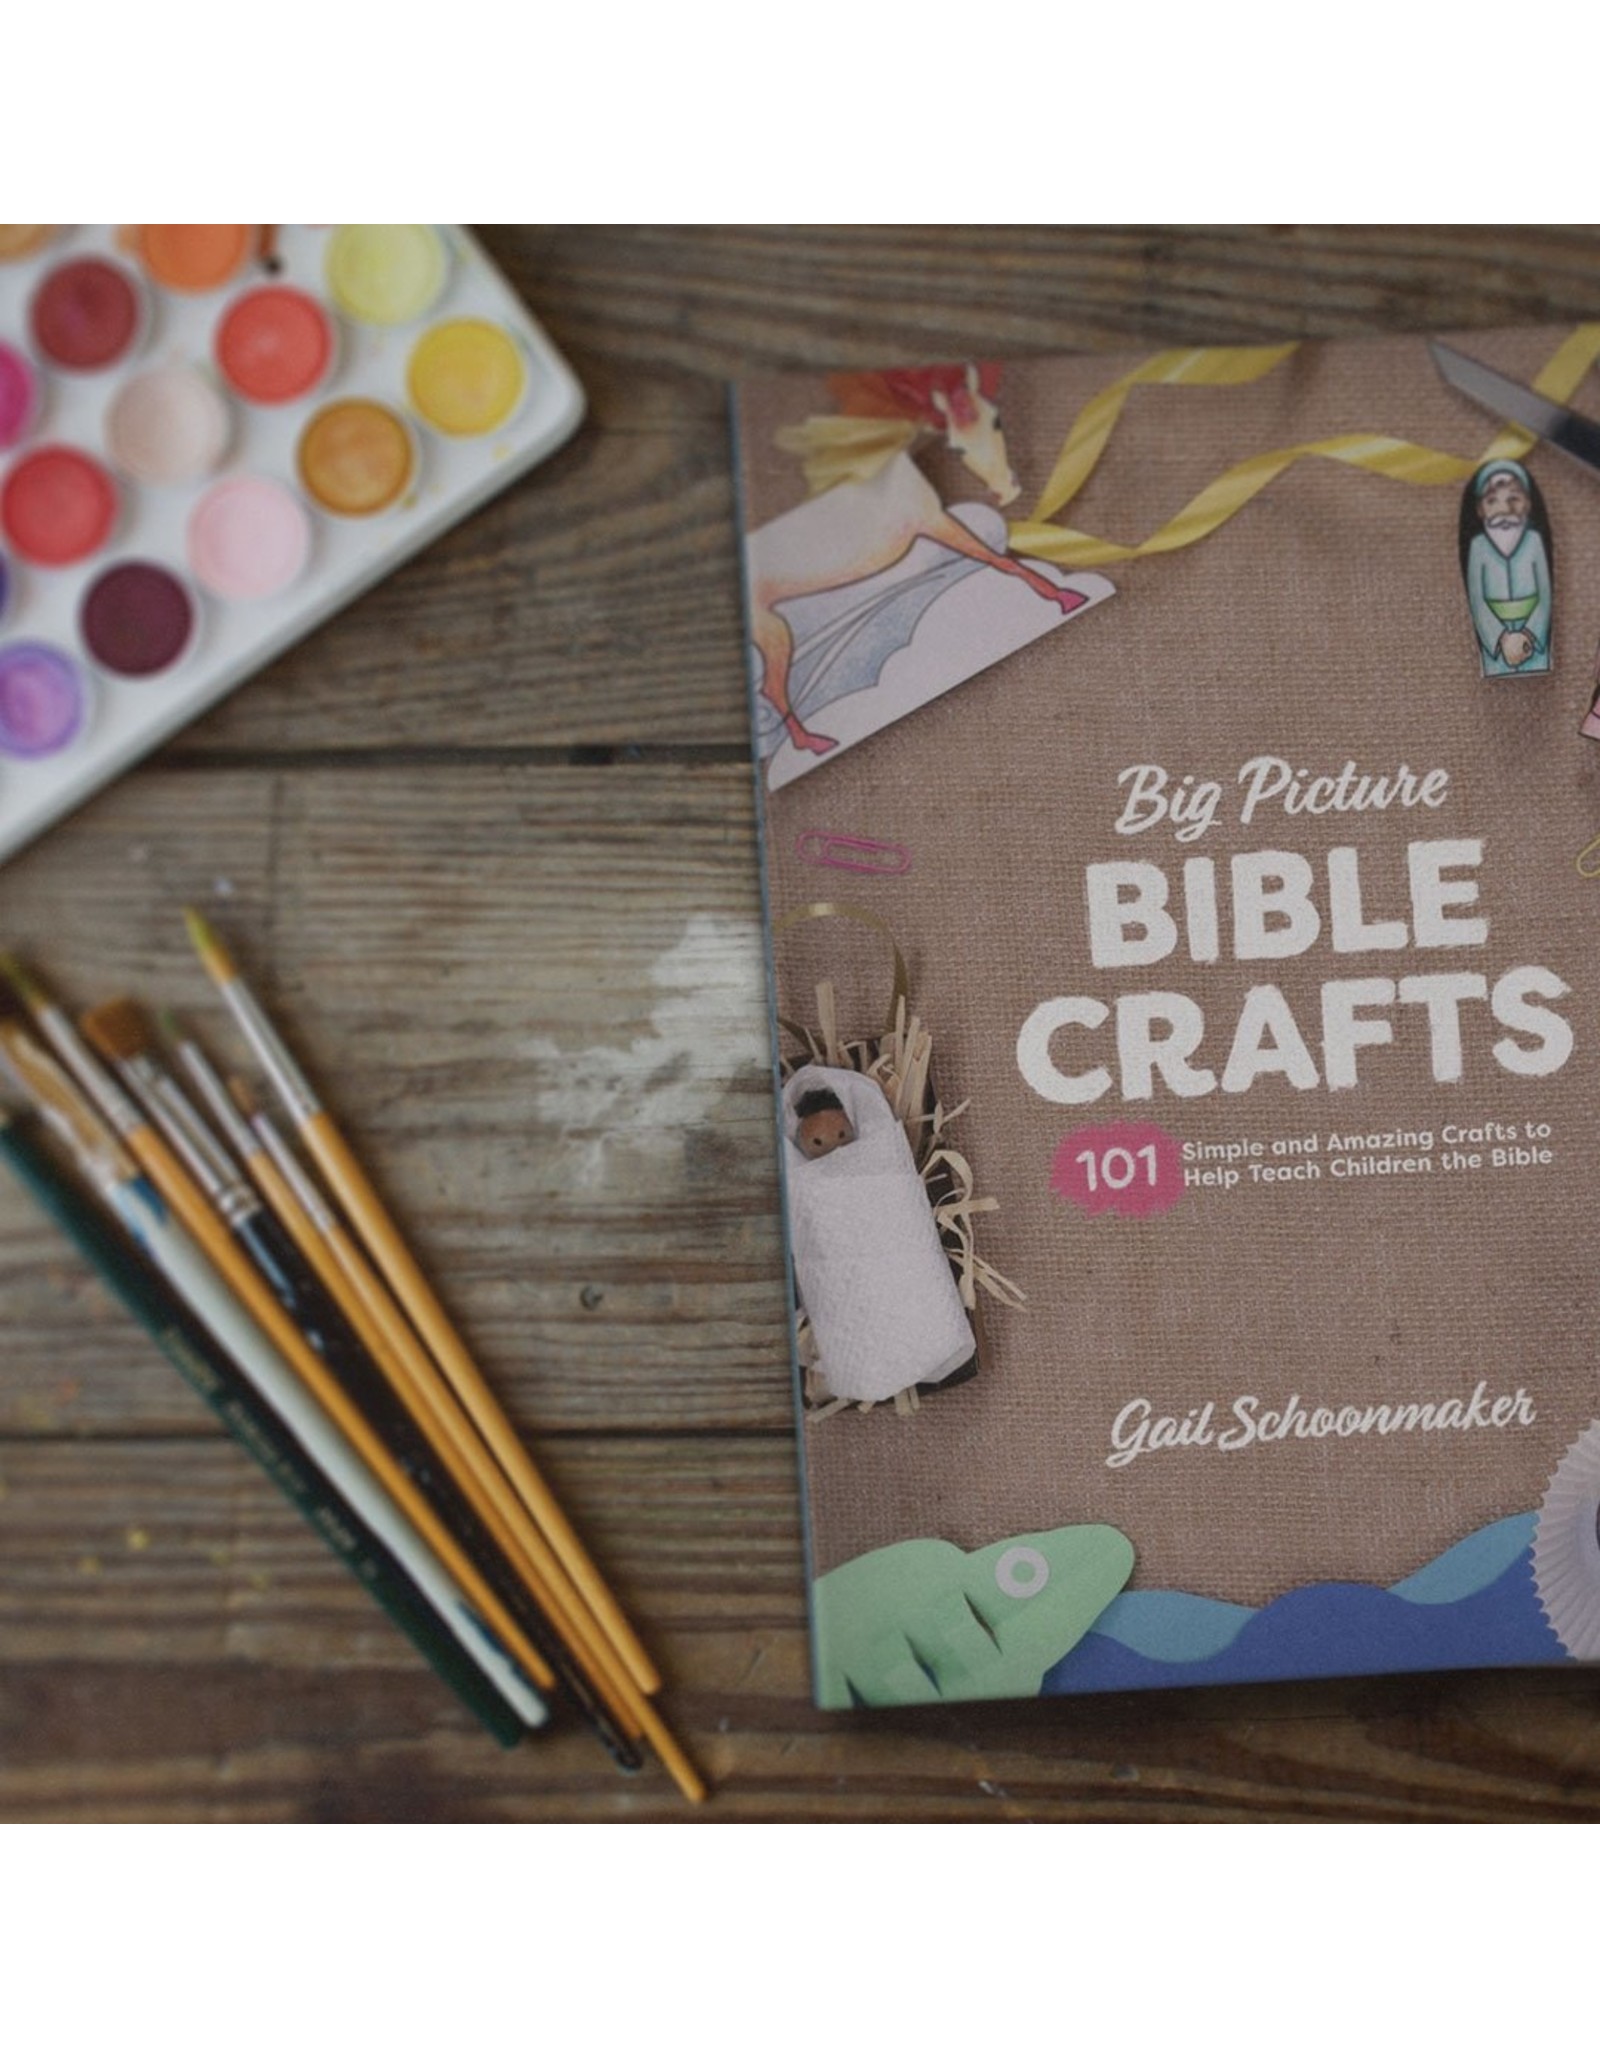 Crossway / Good News Big Picture Bible Crafts: 101 Simple and Amazing Crafts to Help Teach Children the Bible